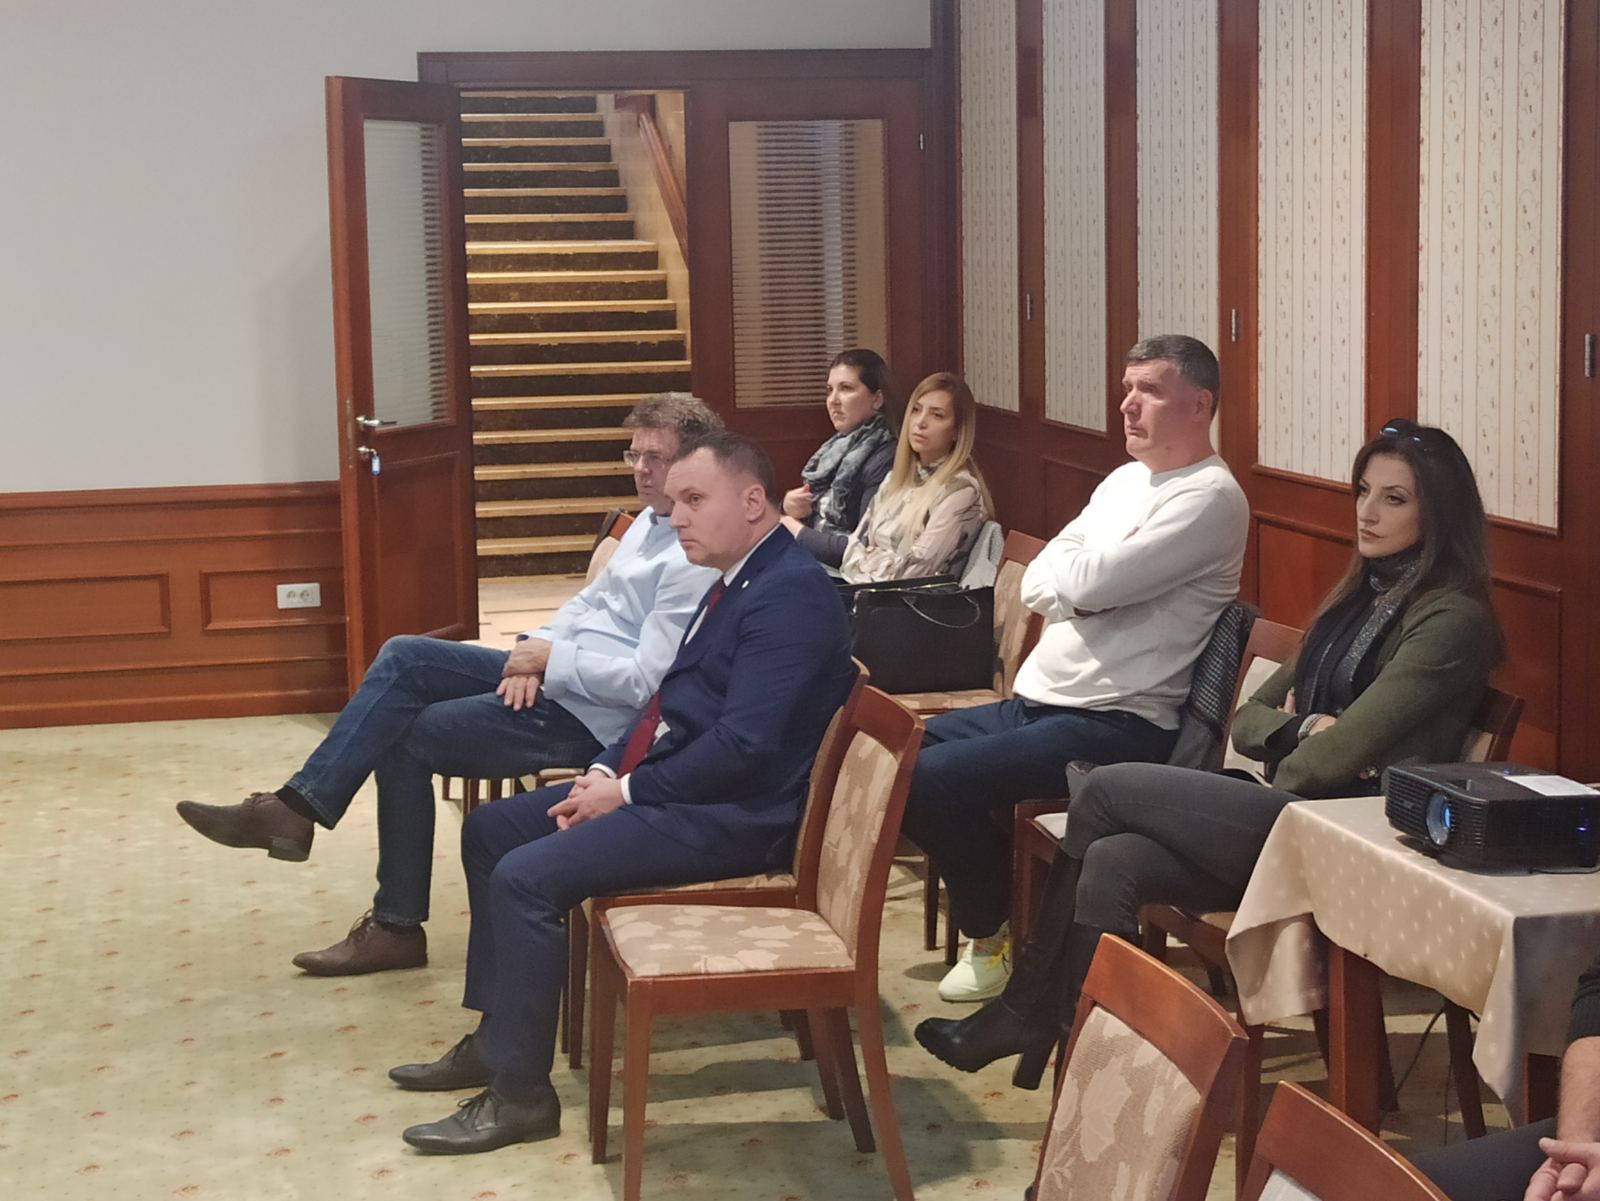 The fourth public presentation of the results of the “Study on Mapping Institutional Violations of Human Rights in Bosnia and Herzegovina” held in Mostar